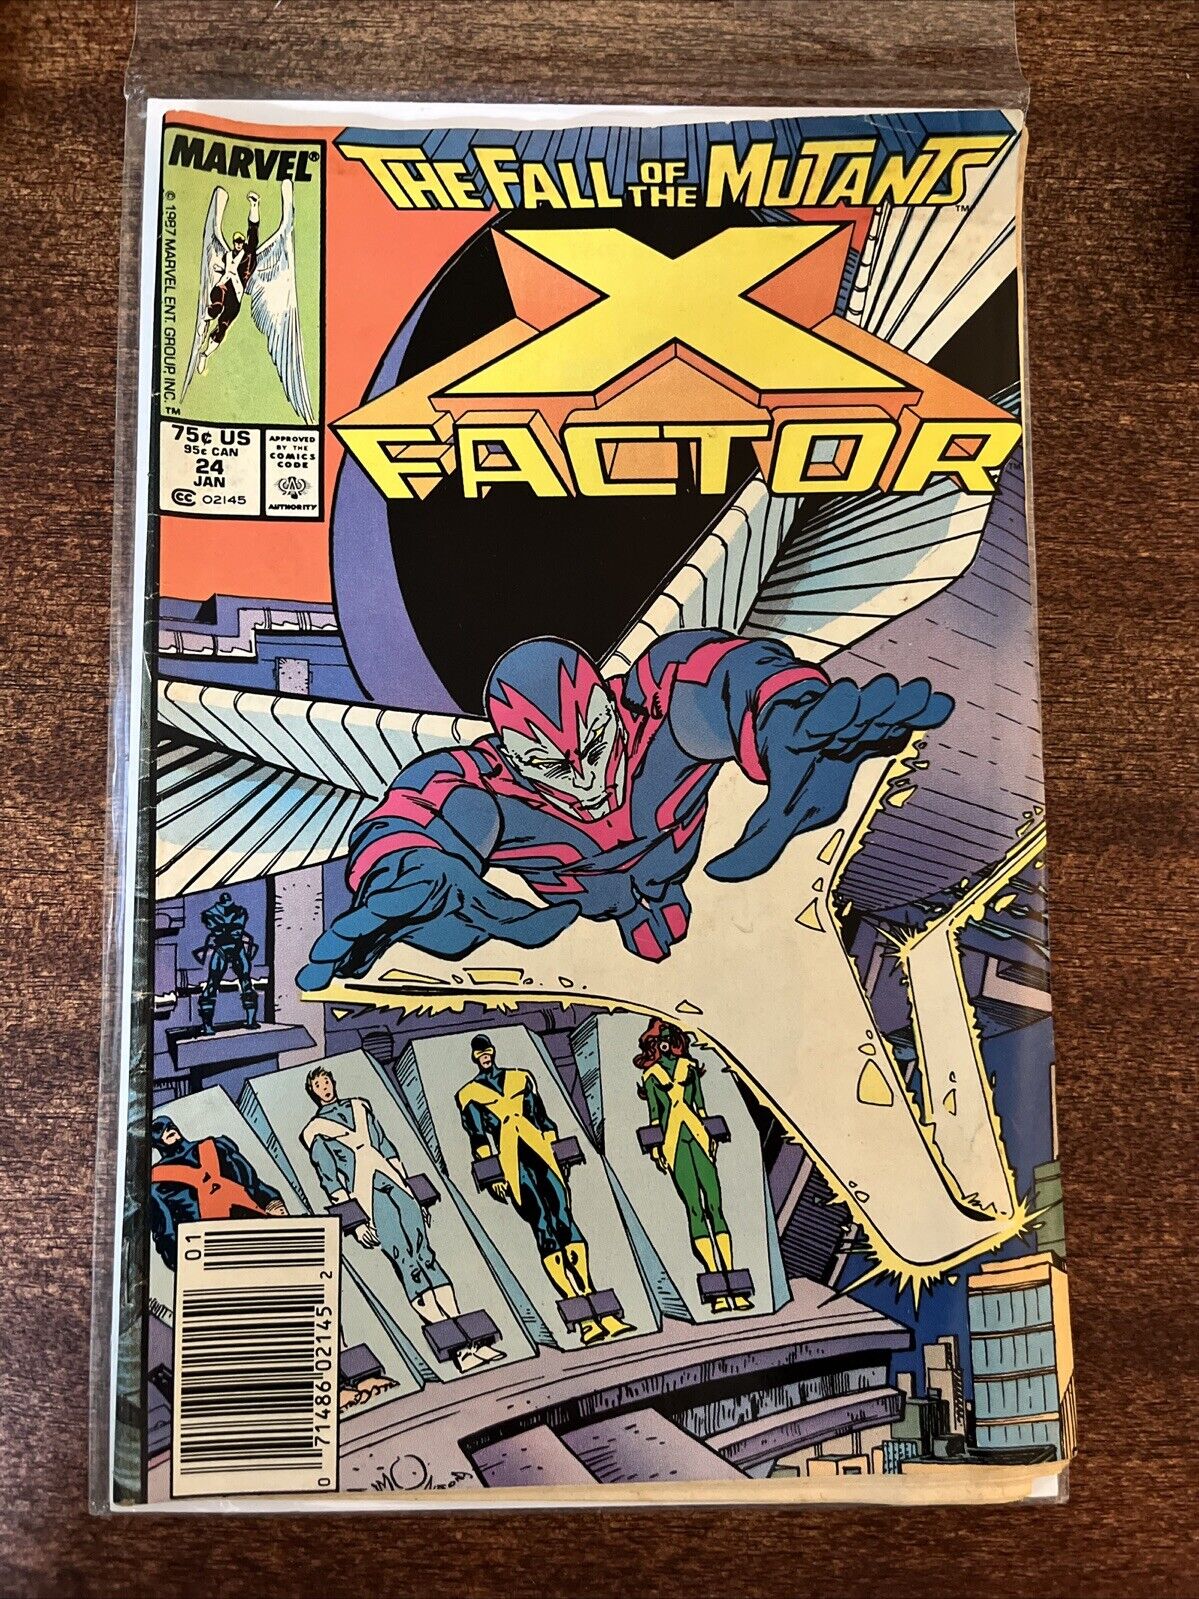 X-Factor (1986) #24 1st Appearance Archangel Marvel 1988 Fall Of The Mutants